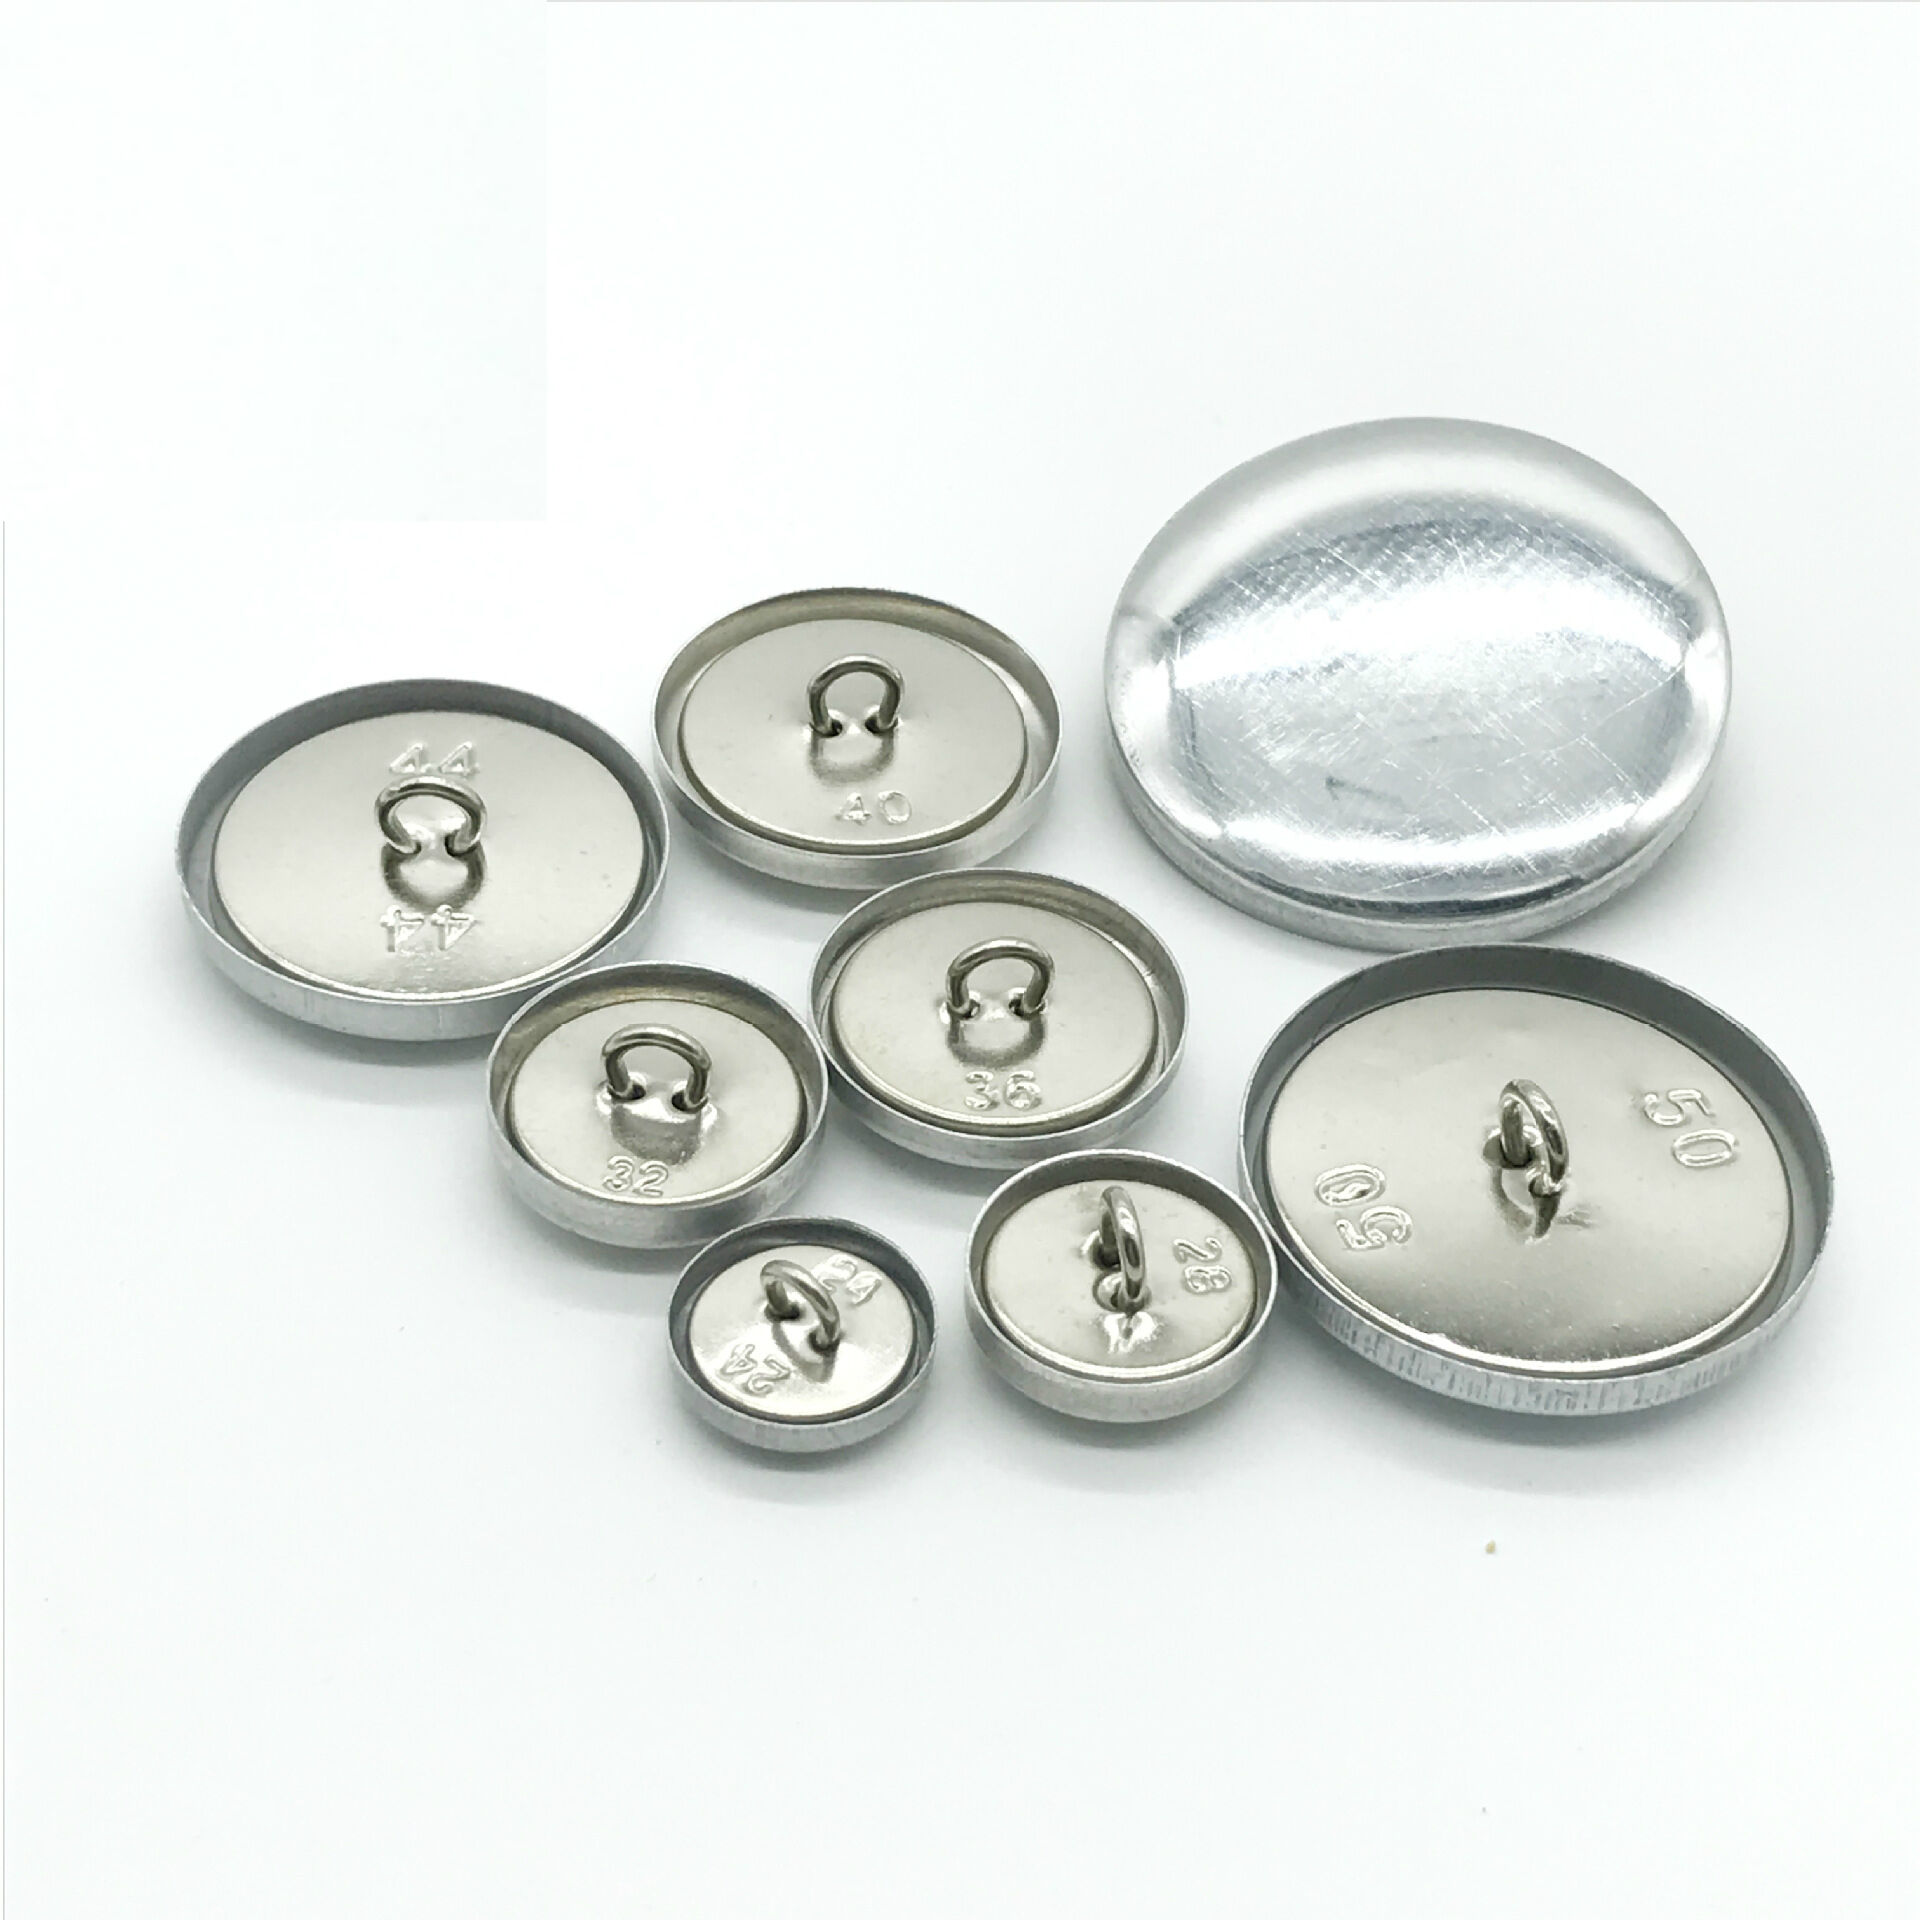 High quality blank aluminum fabric covered shank button